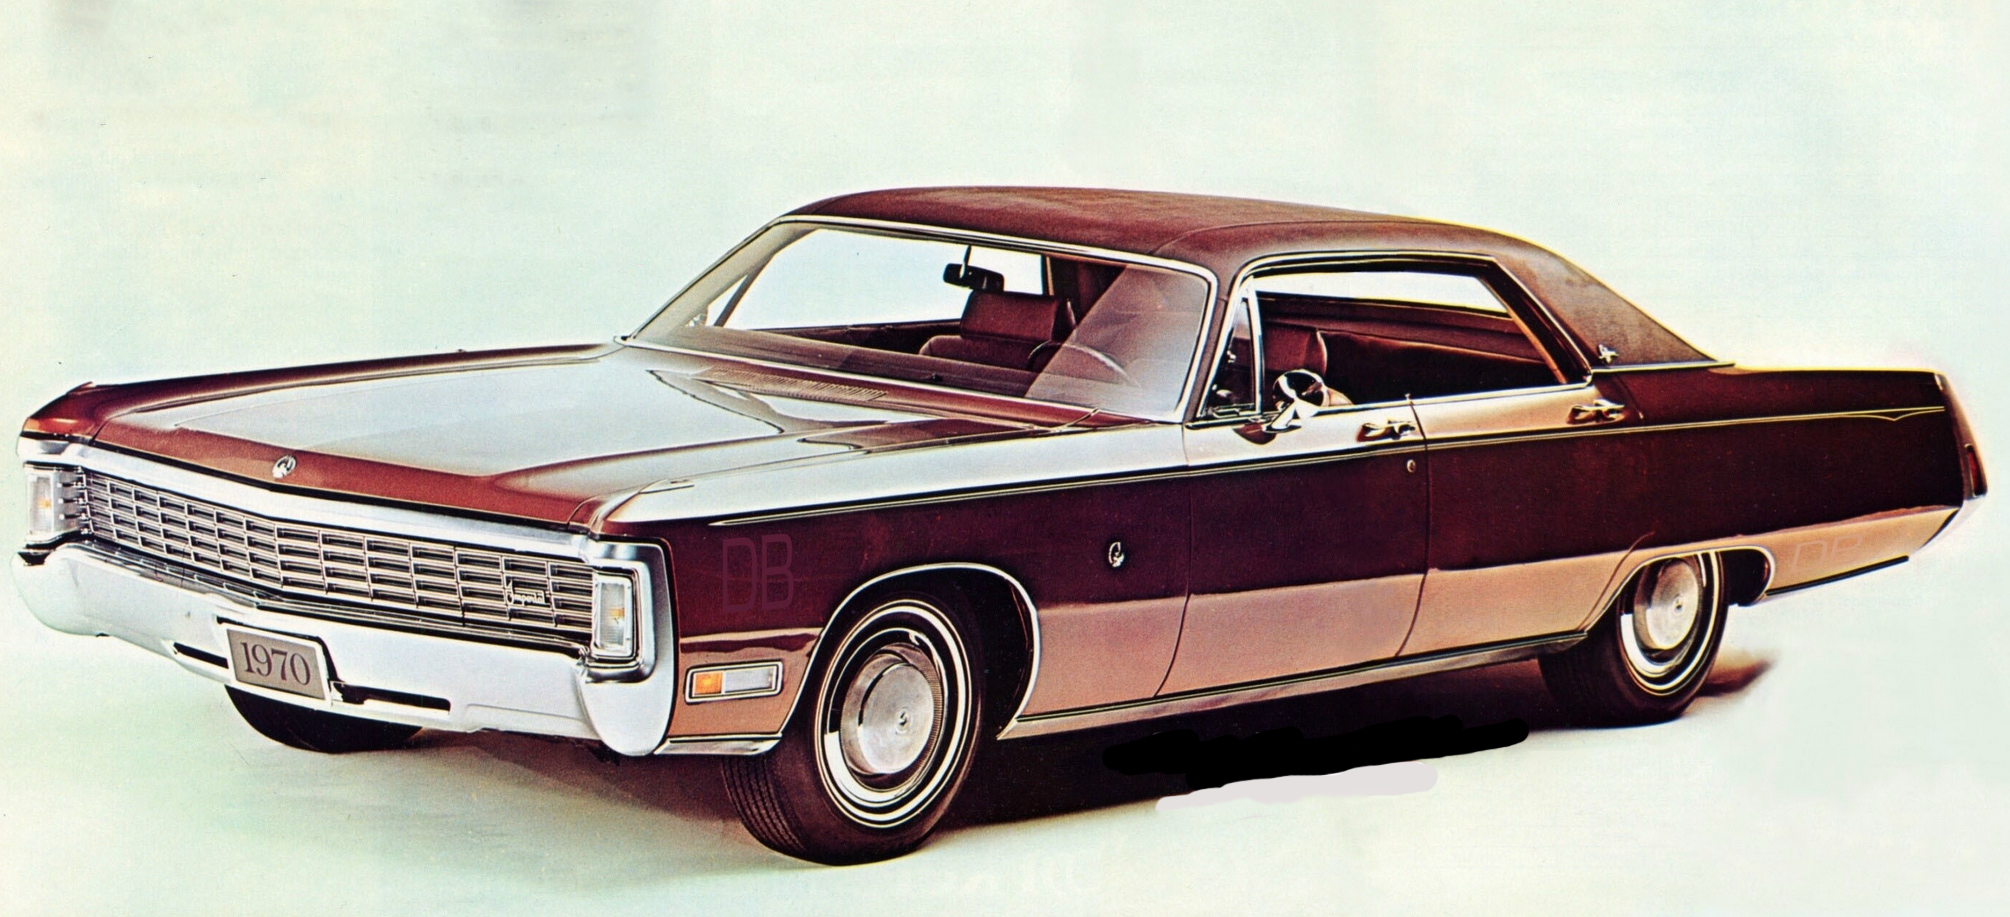 1970 Chrysler Imperial Review 